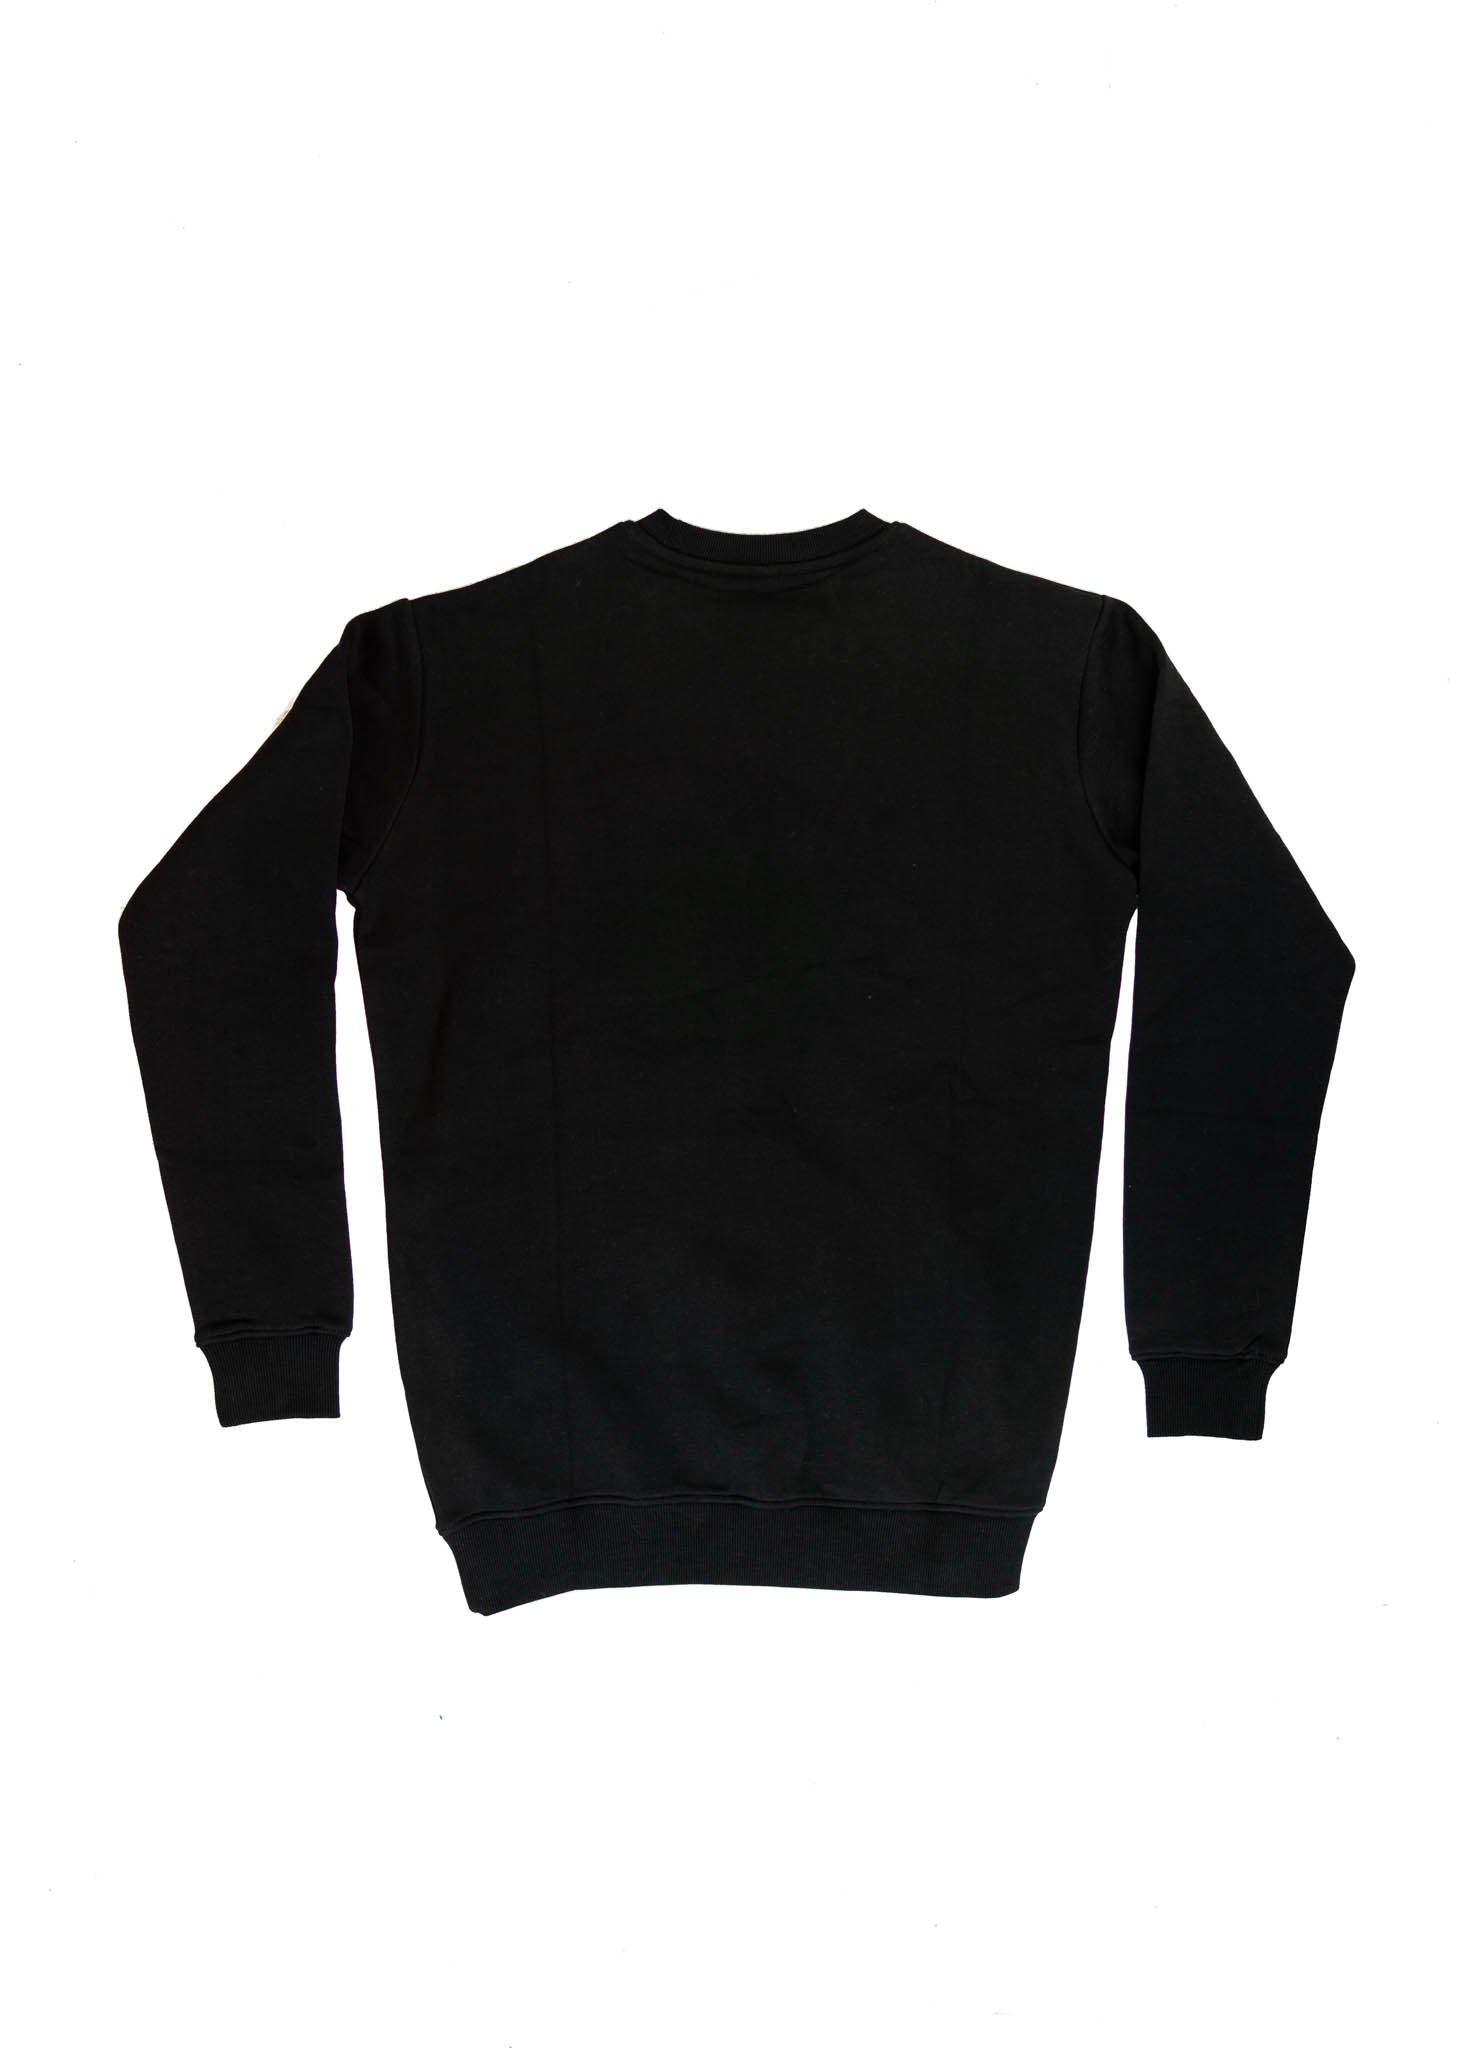 A black Volvo crewneck sweater for men. Photo is the back of the sweater with an embroidered 850R. Fabric is composed of high quality 80% cotton, and 20% polyester and fits to size. The style is long sleeve, crew neck, and embroidery on left chest.